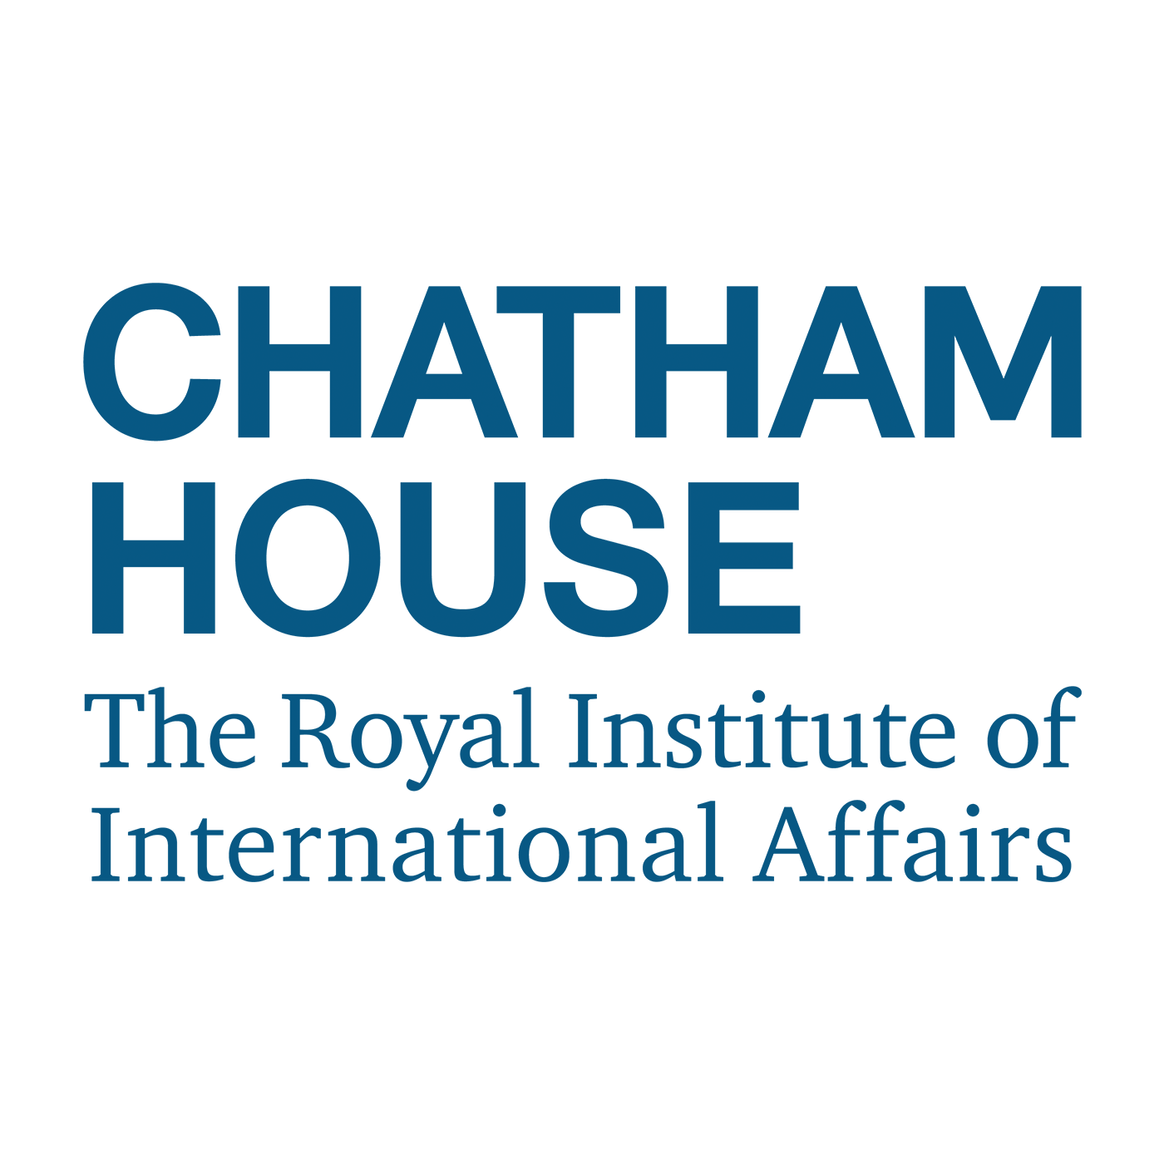 Chatham House - The Royal Institute of International Affairs on Market of Expert Networks